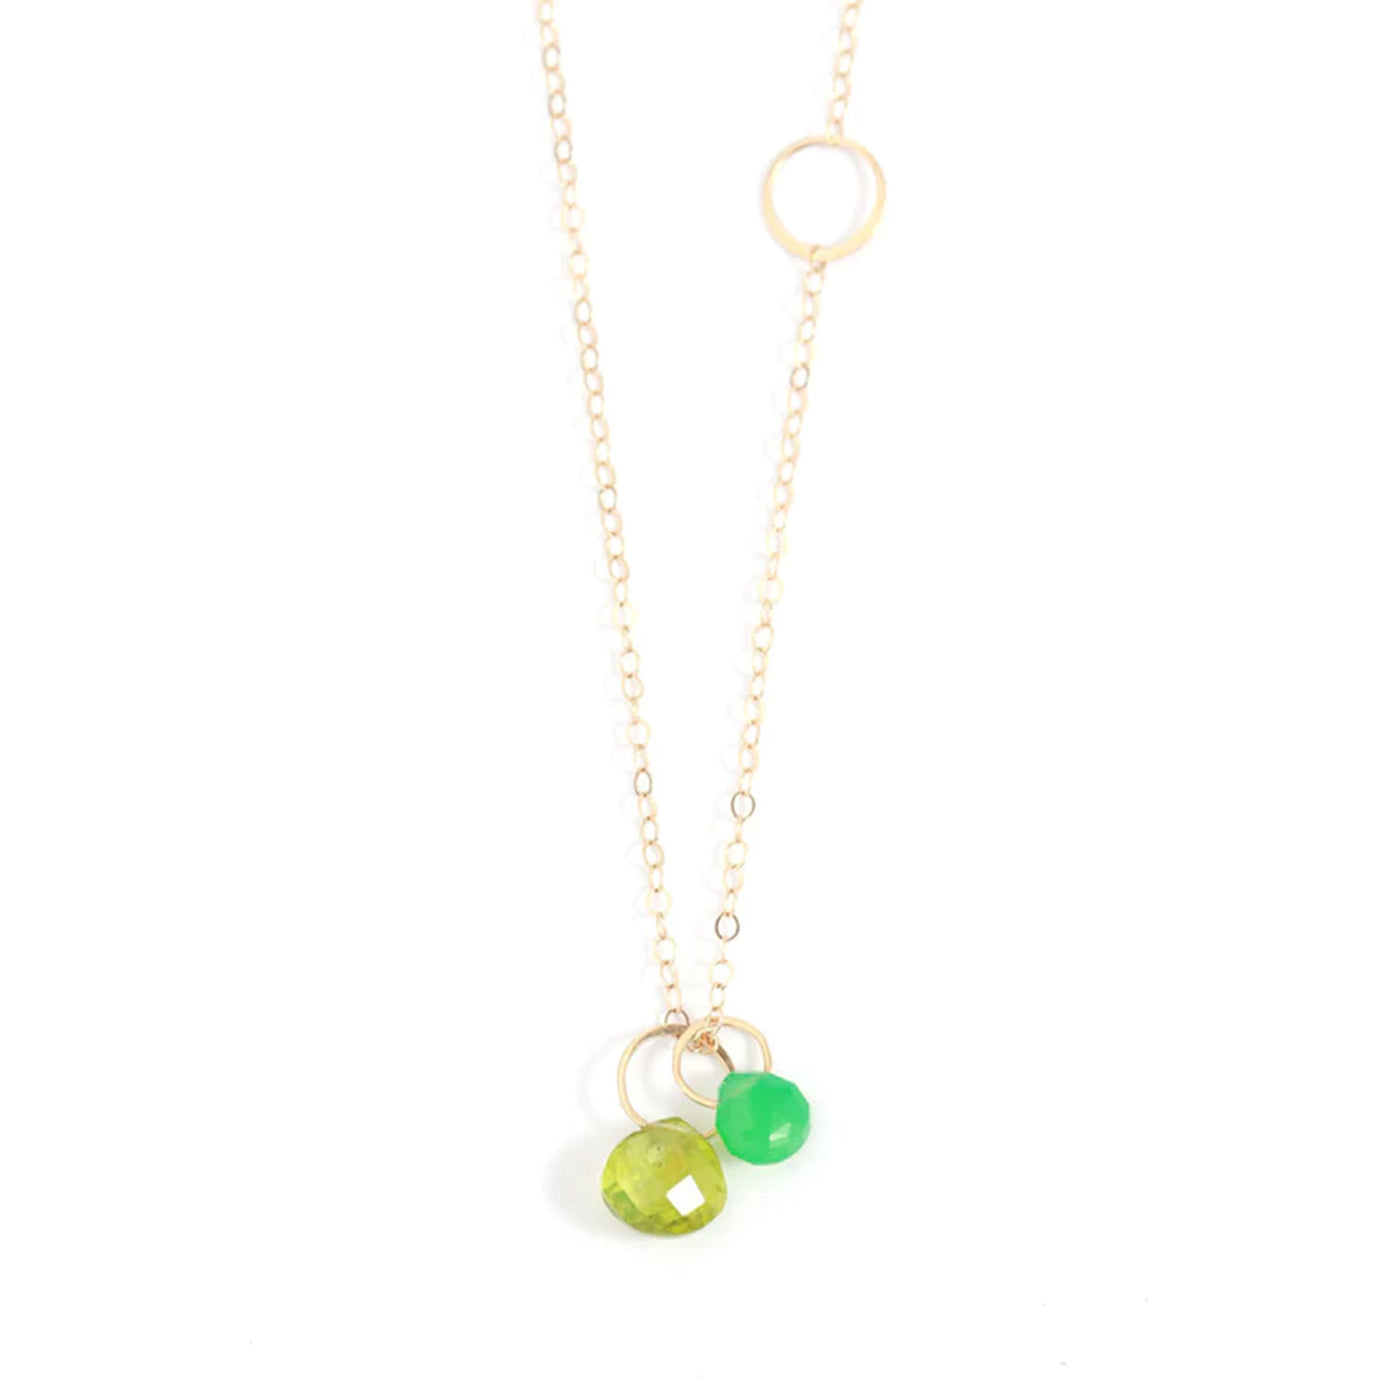 Peridot and Chrysoprase Necklace